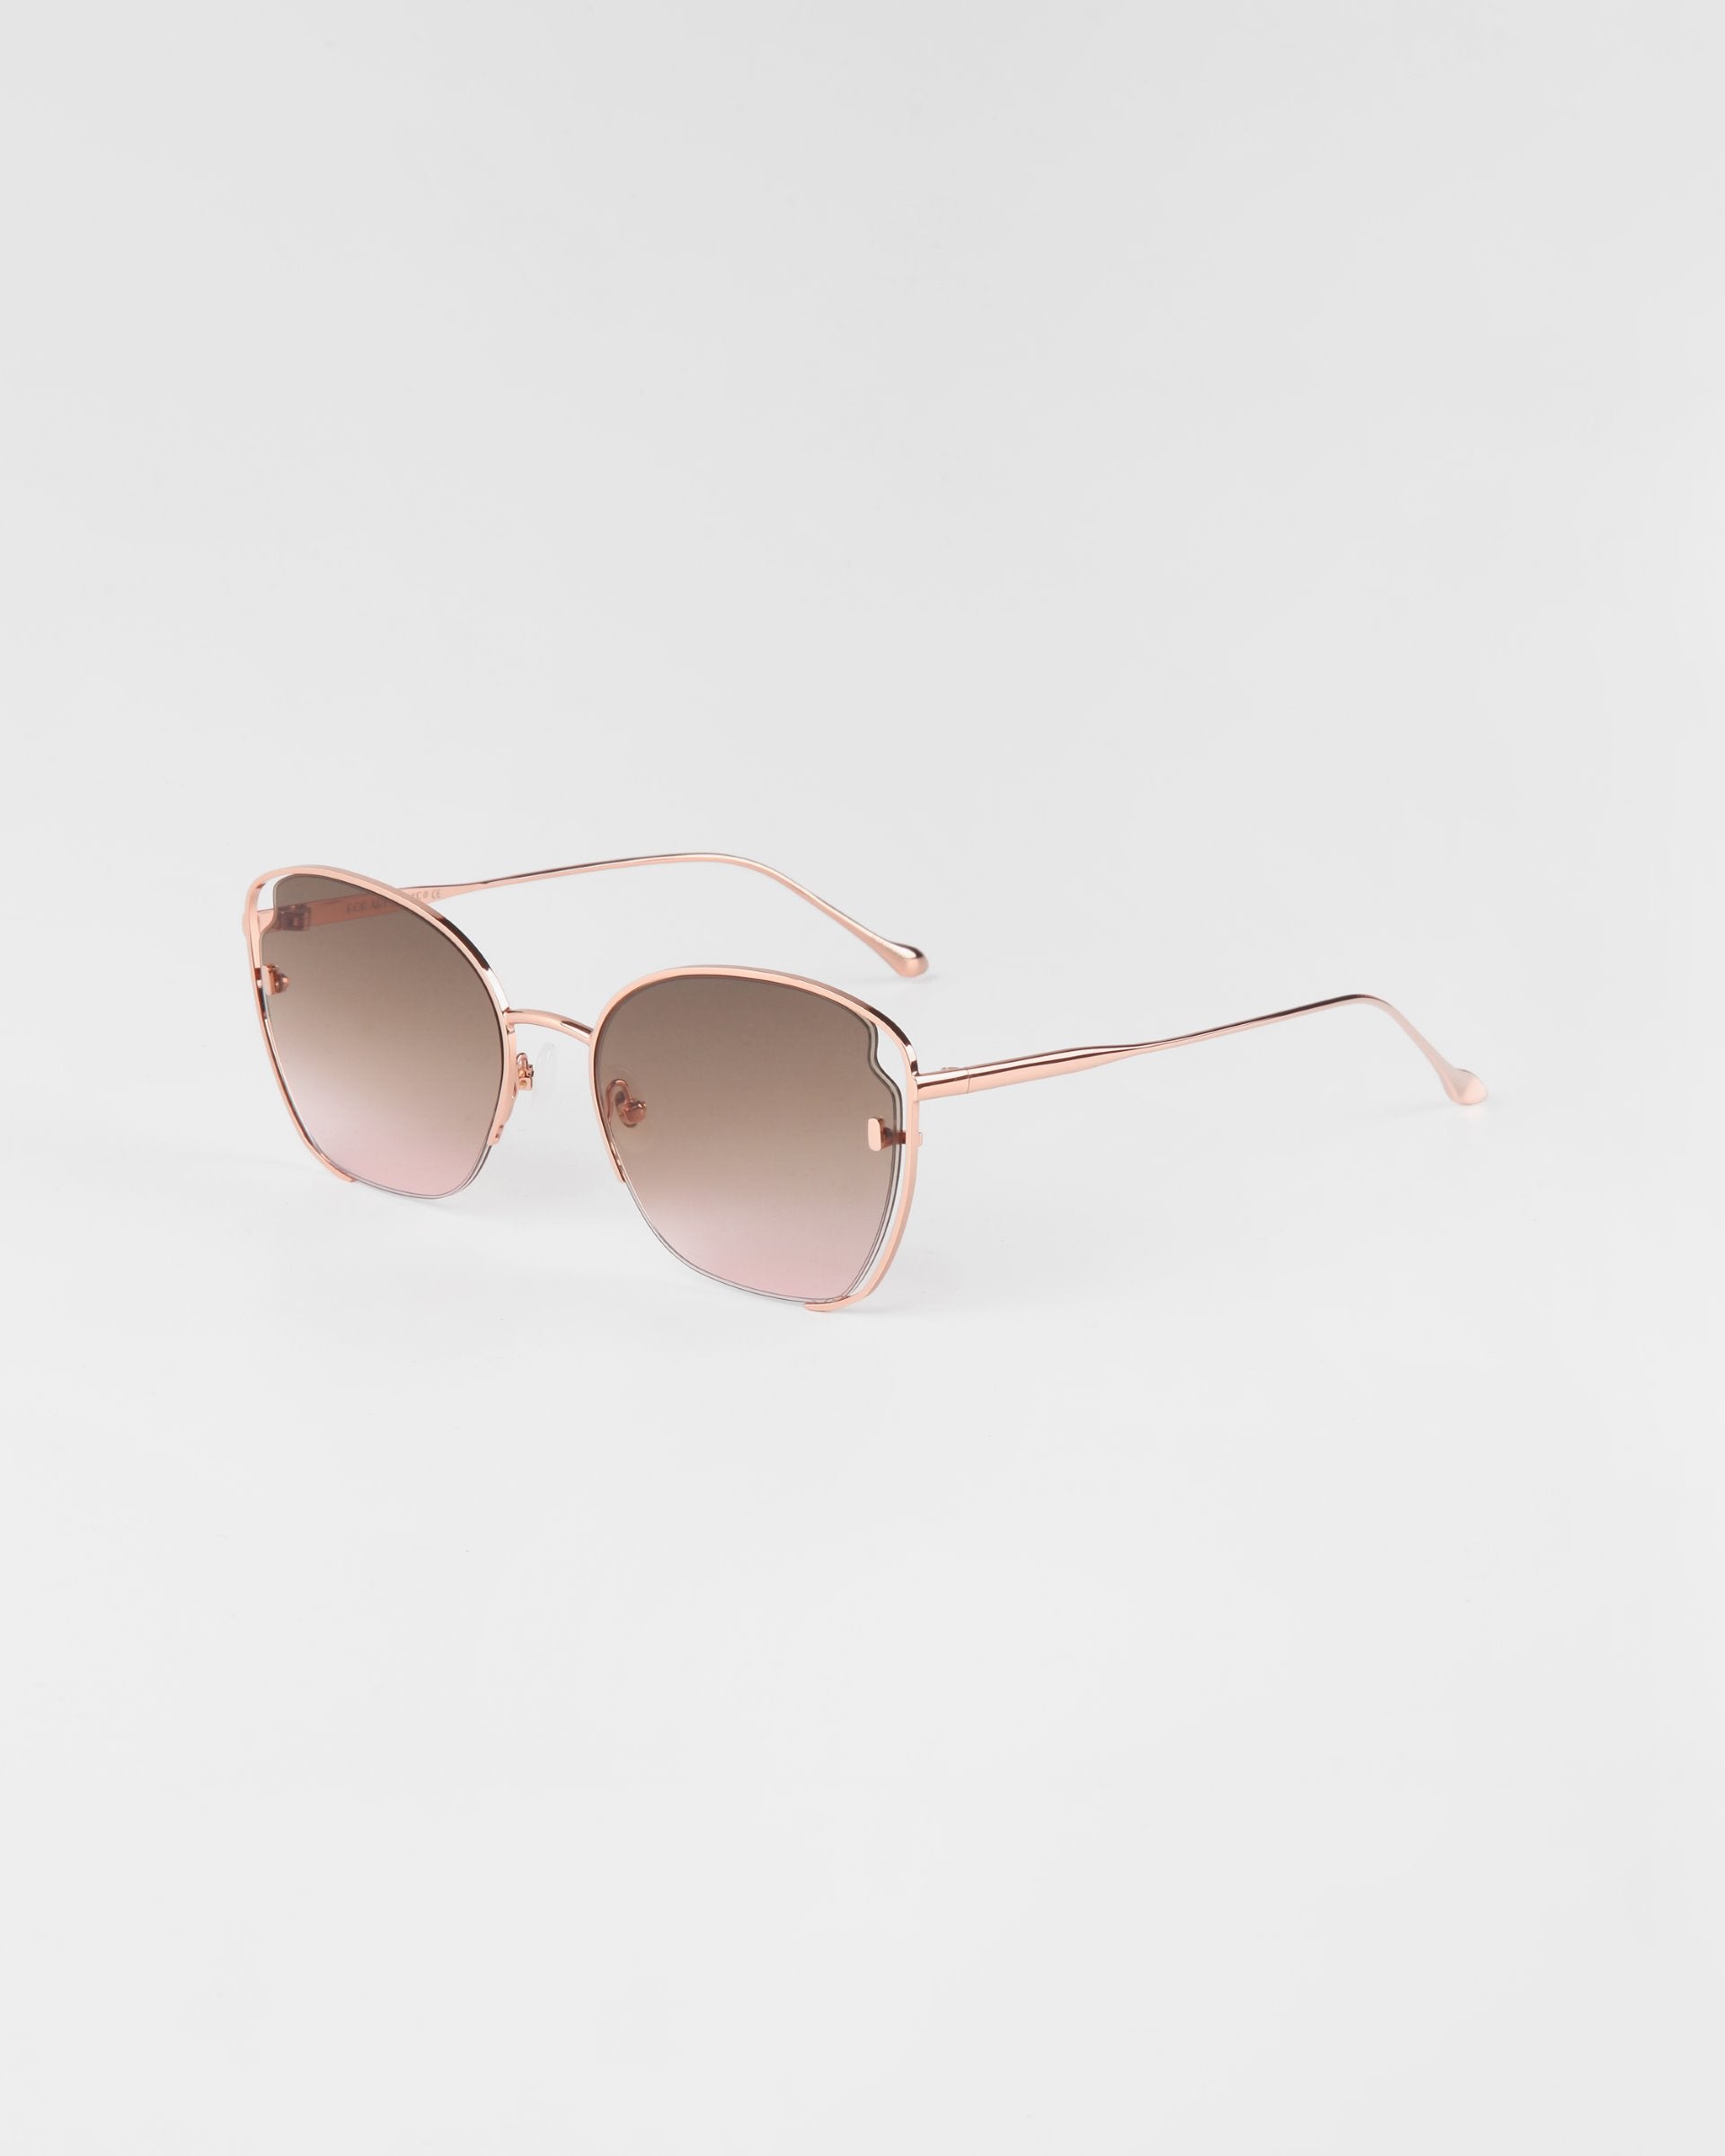 A pair of stylish For Art's Sake® Eden sunglasses, 18-karat gold plated with a thin metal frame and gradient lenses. The design features a slight cat-eye shape and sleek temples, offering UVA & UVB protection as they cast a soft shadow on the white background.